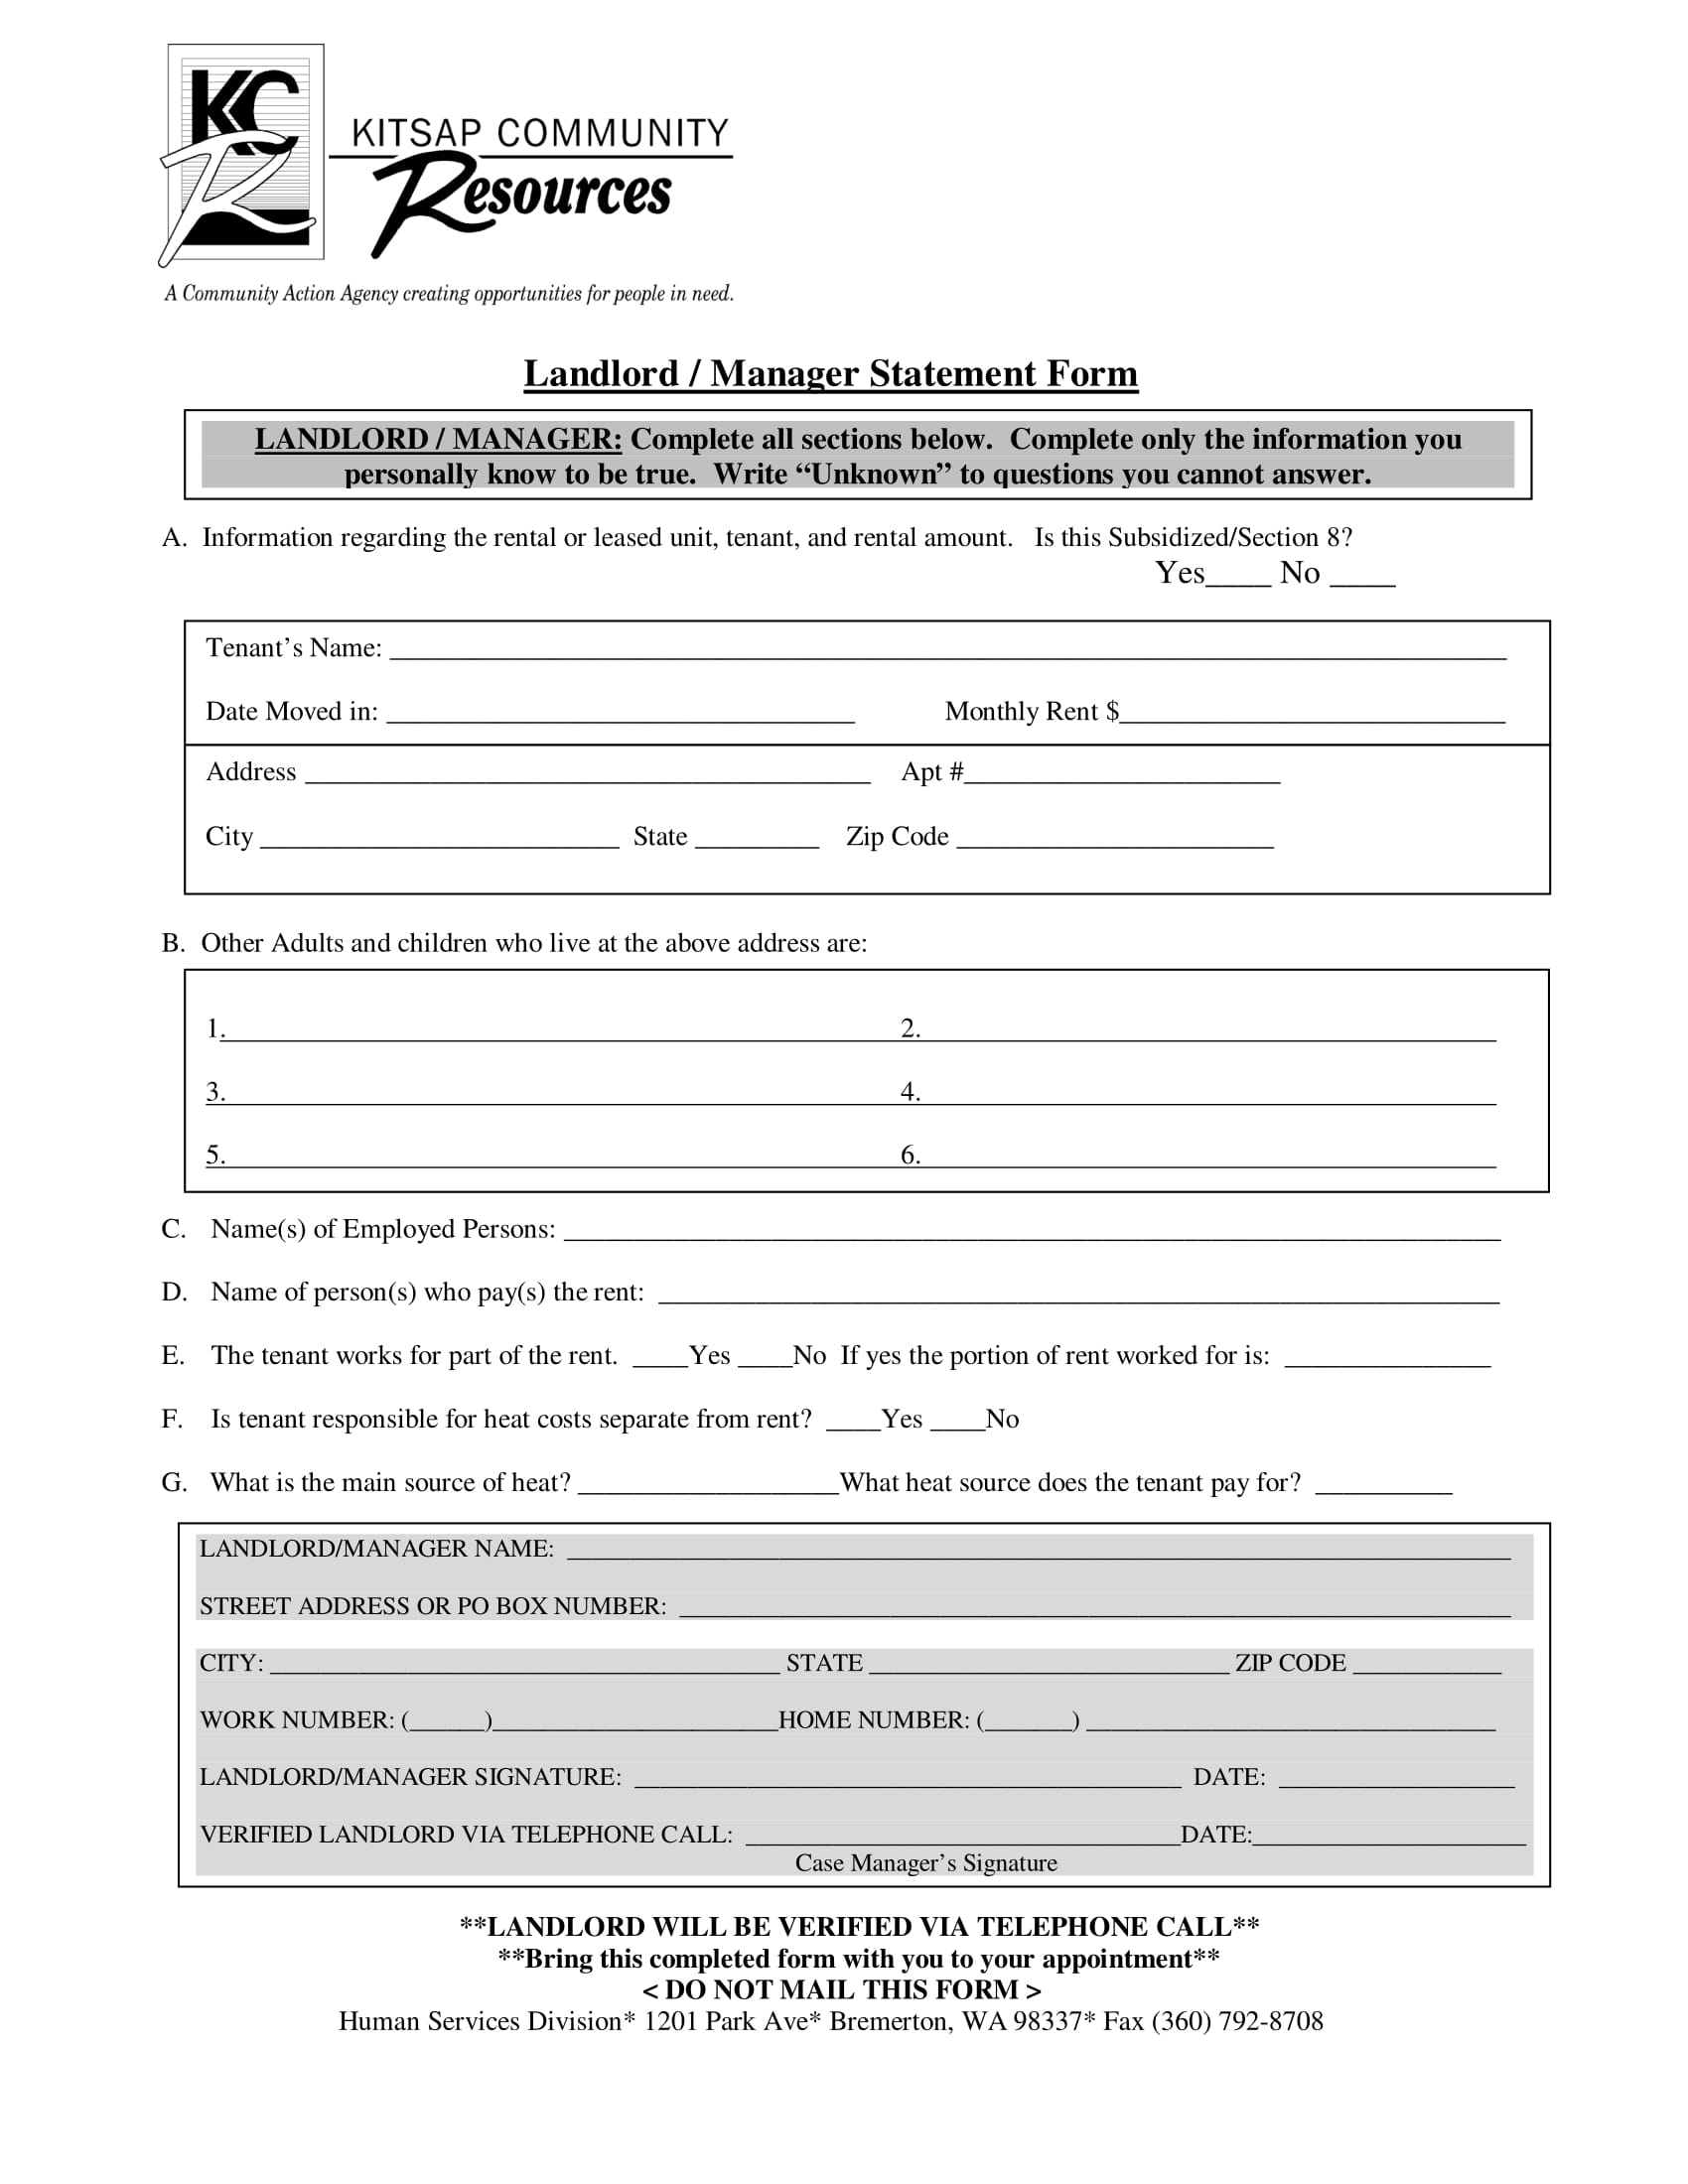 free-printable-landlord-statement-printable-form-templates-and-letter